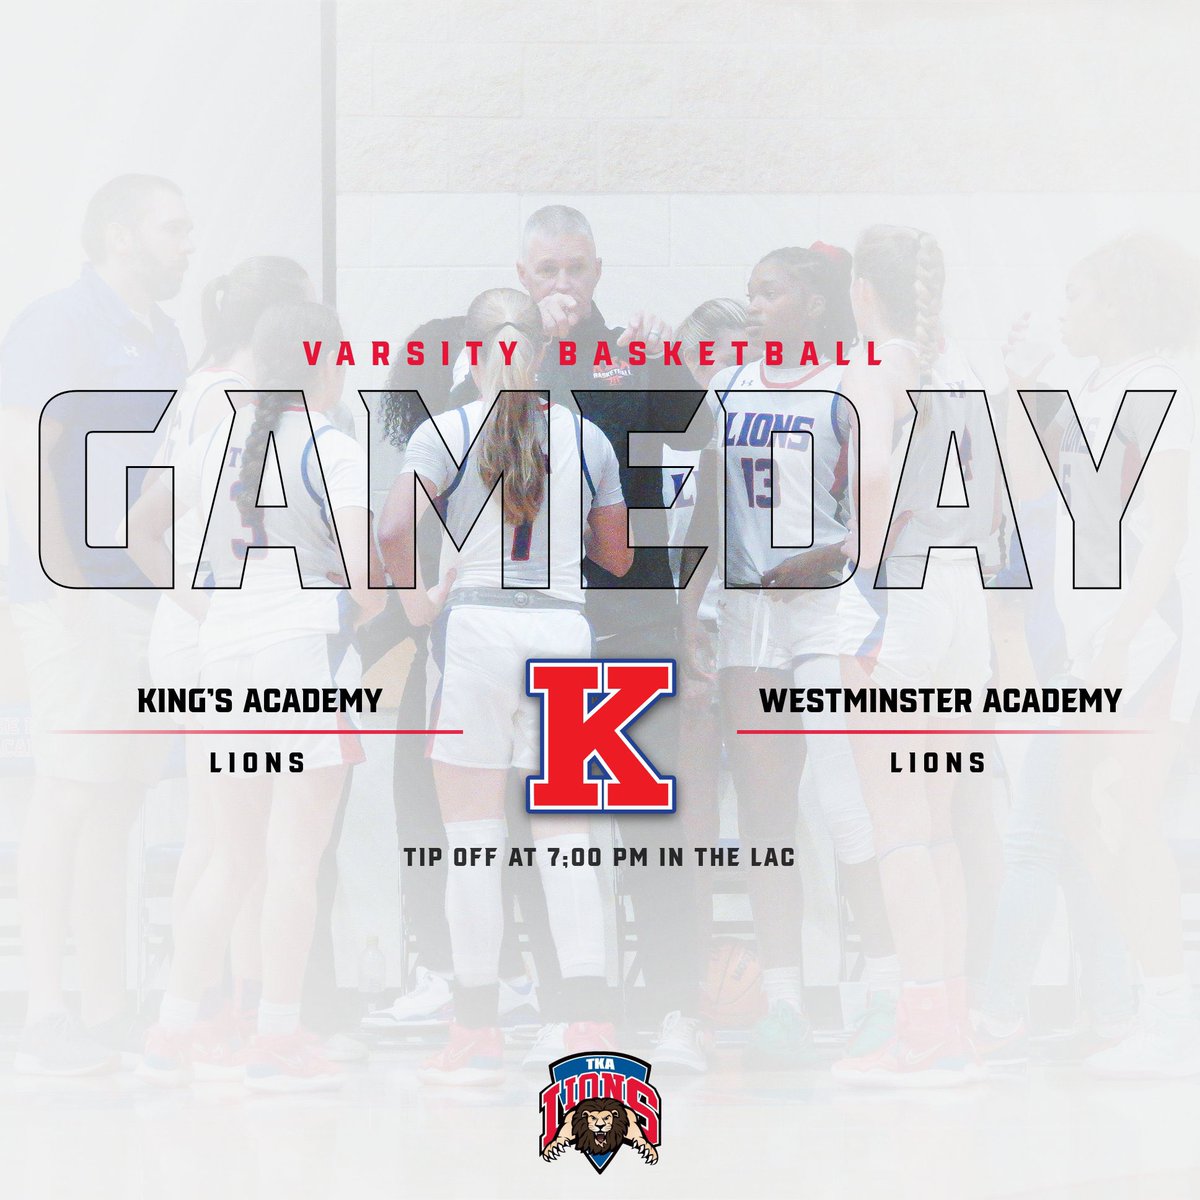 Big game tonight at King’s Academy!! Lions take on reigning 3A State Champion Westminster Academy at 7:00 pm. Come out and support the girls! @TKALions @tkalionsgirlsbb @PBCBBallForum @pbpsports @pbphighschools @emilee_smarr @SUTSReport @SAthletesLBB @PGHFlorida @Rangeman_Films